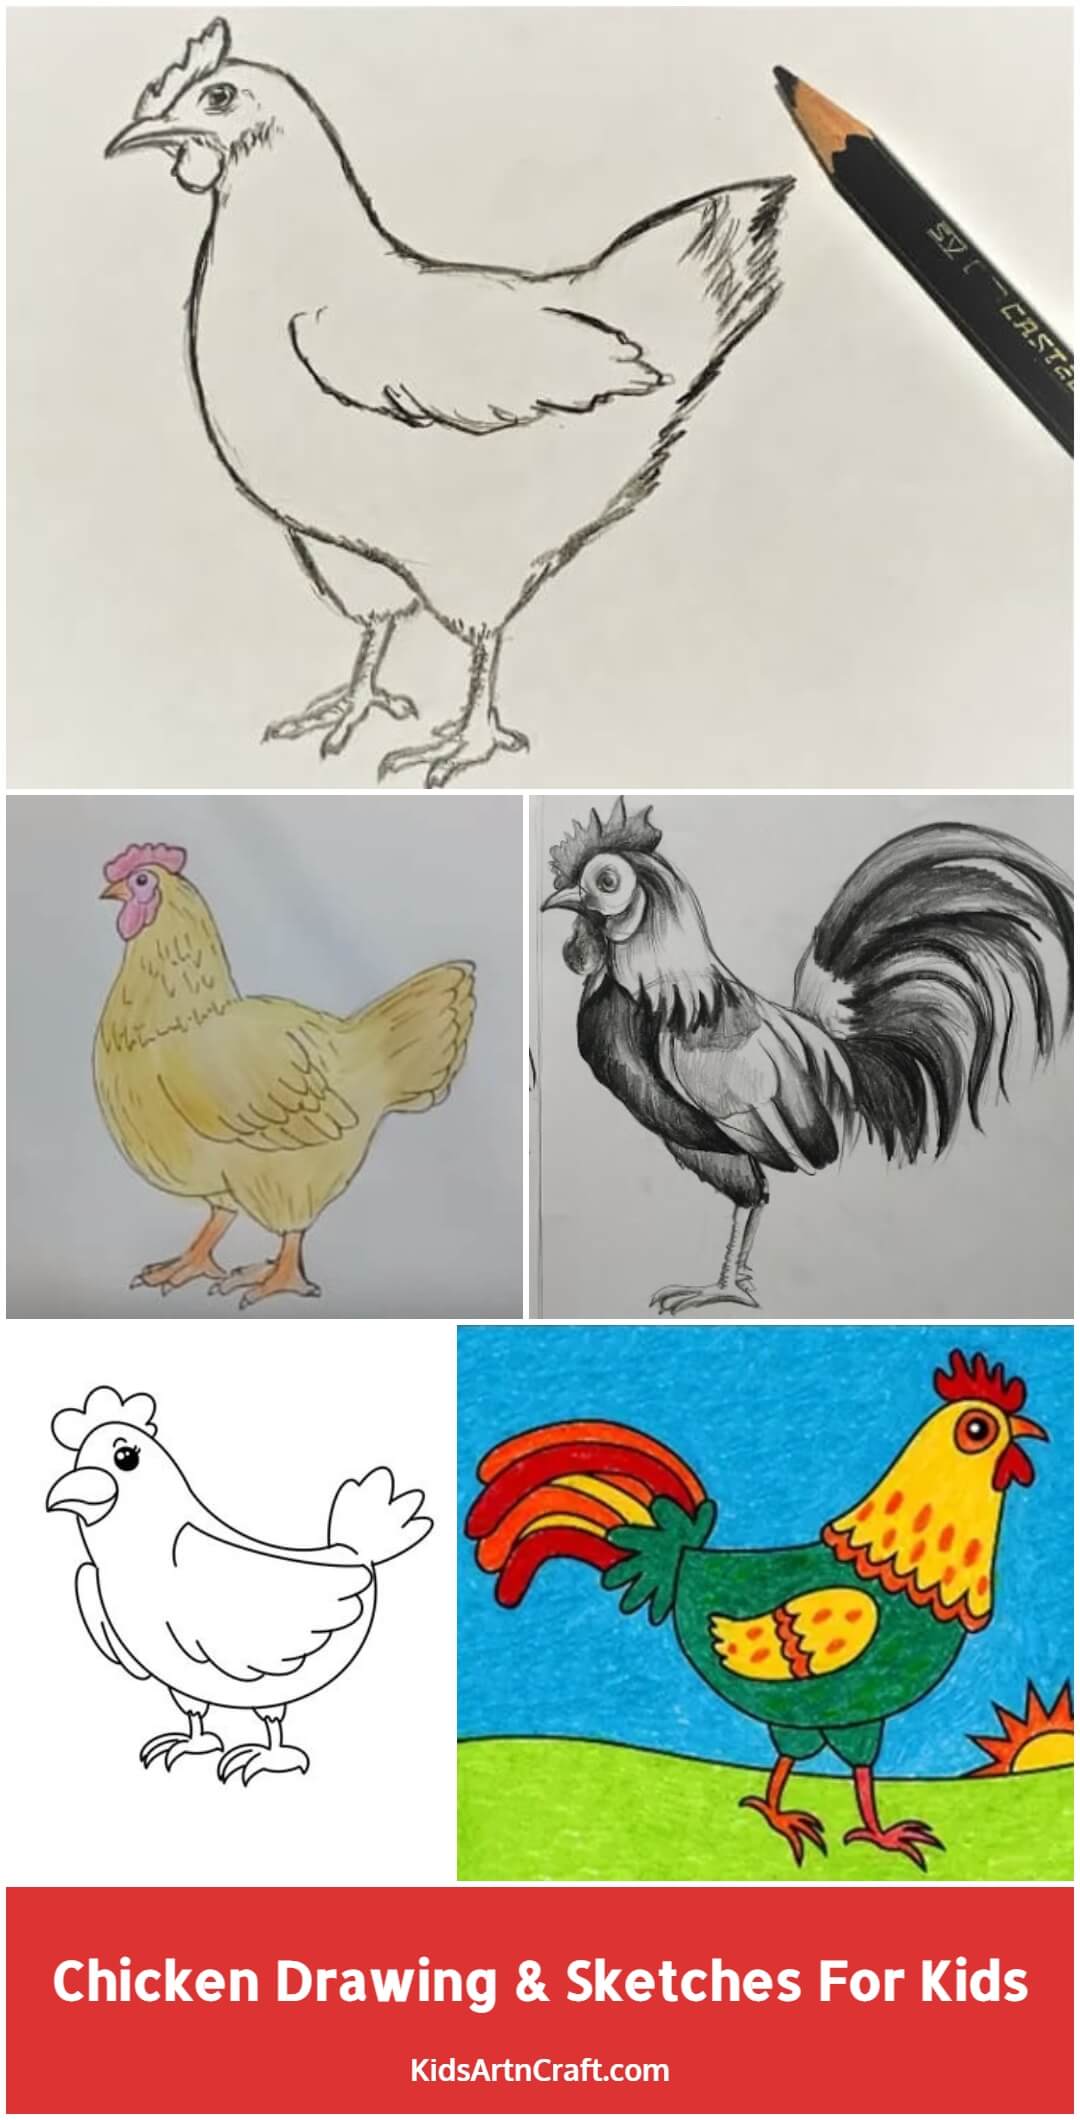 Chicken Drawing & Sketches For Kids